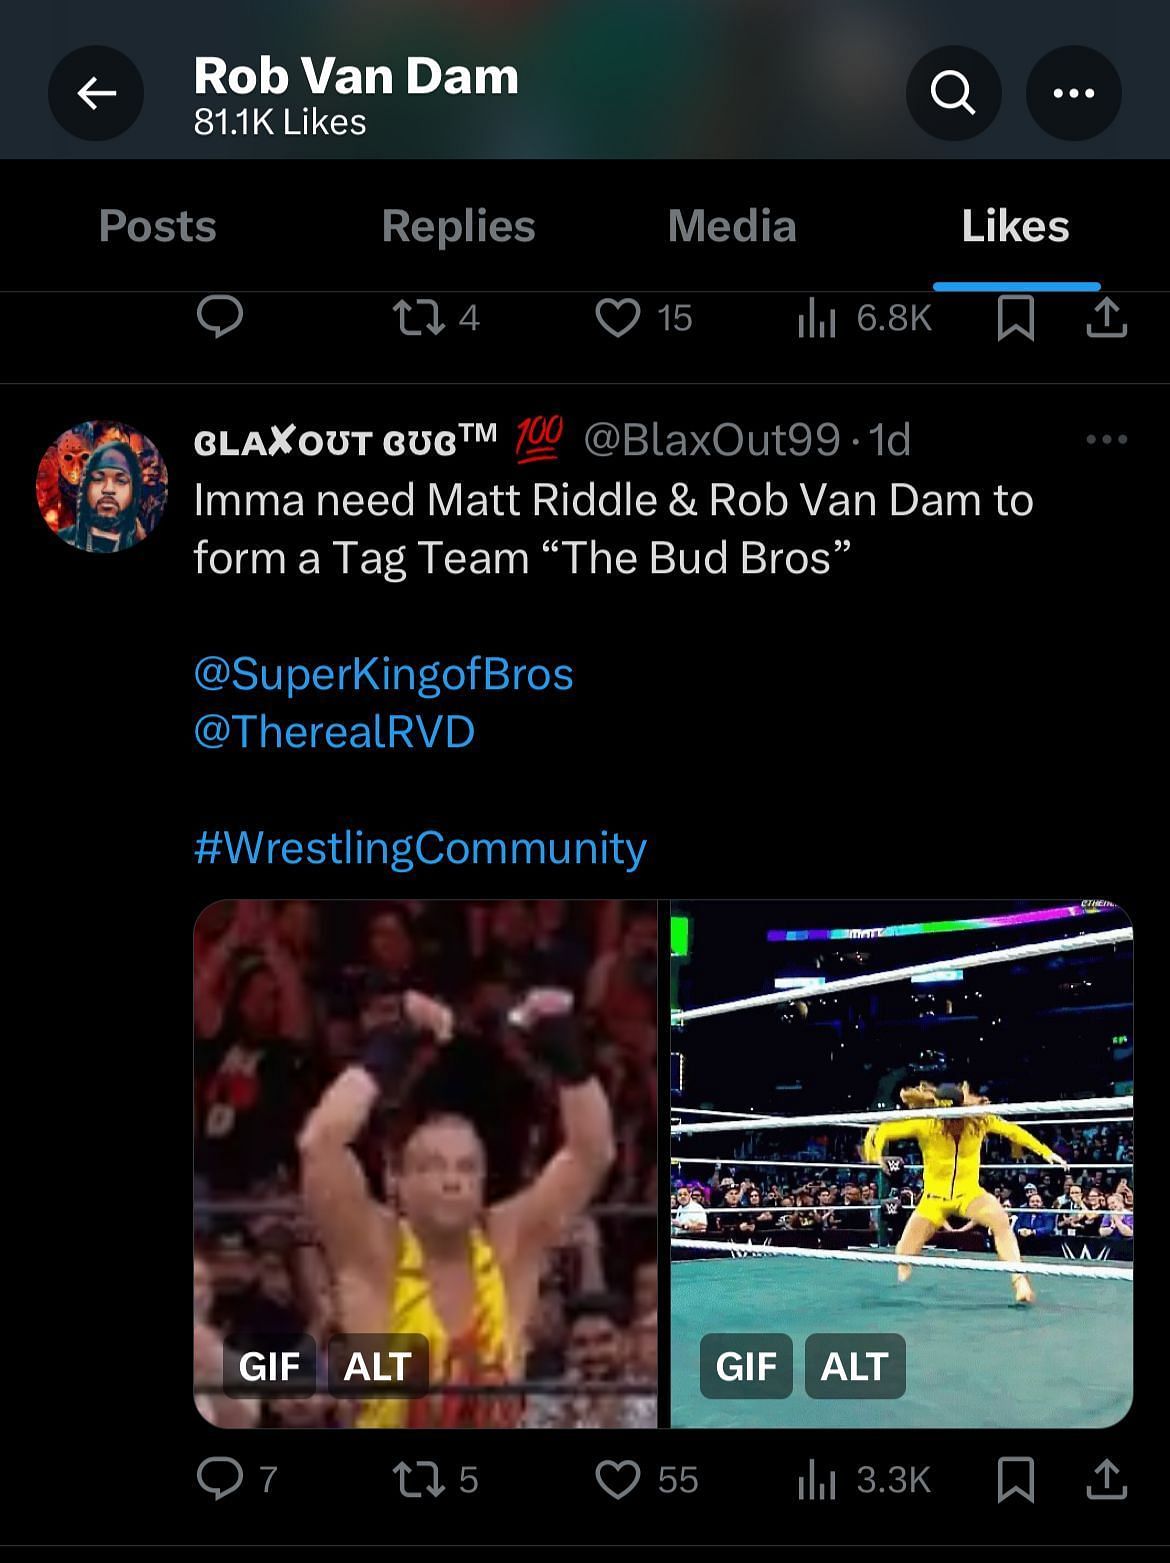 RVD liked a tweet that suggests him teaming up with Matt Riddle